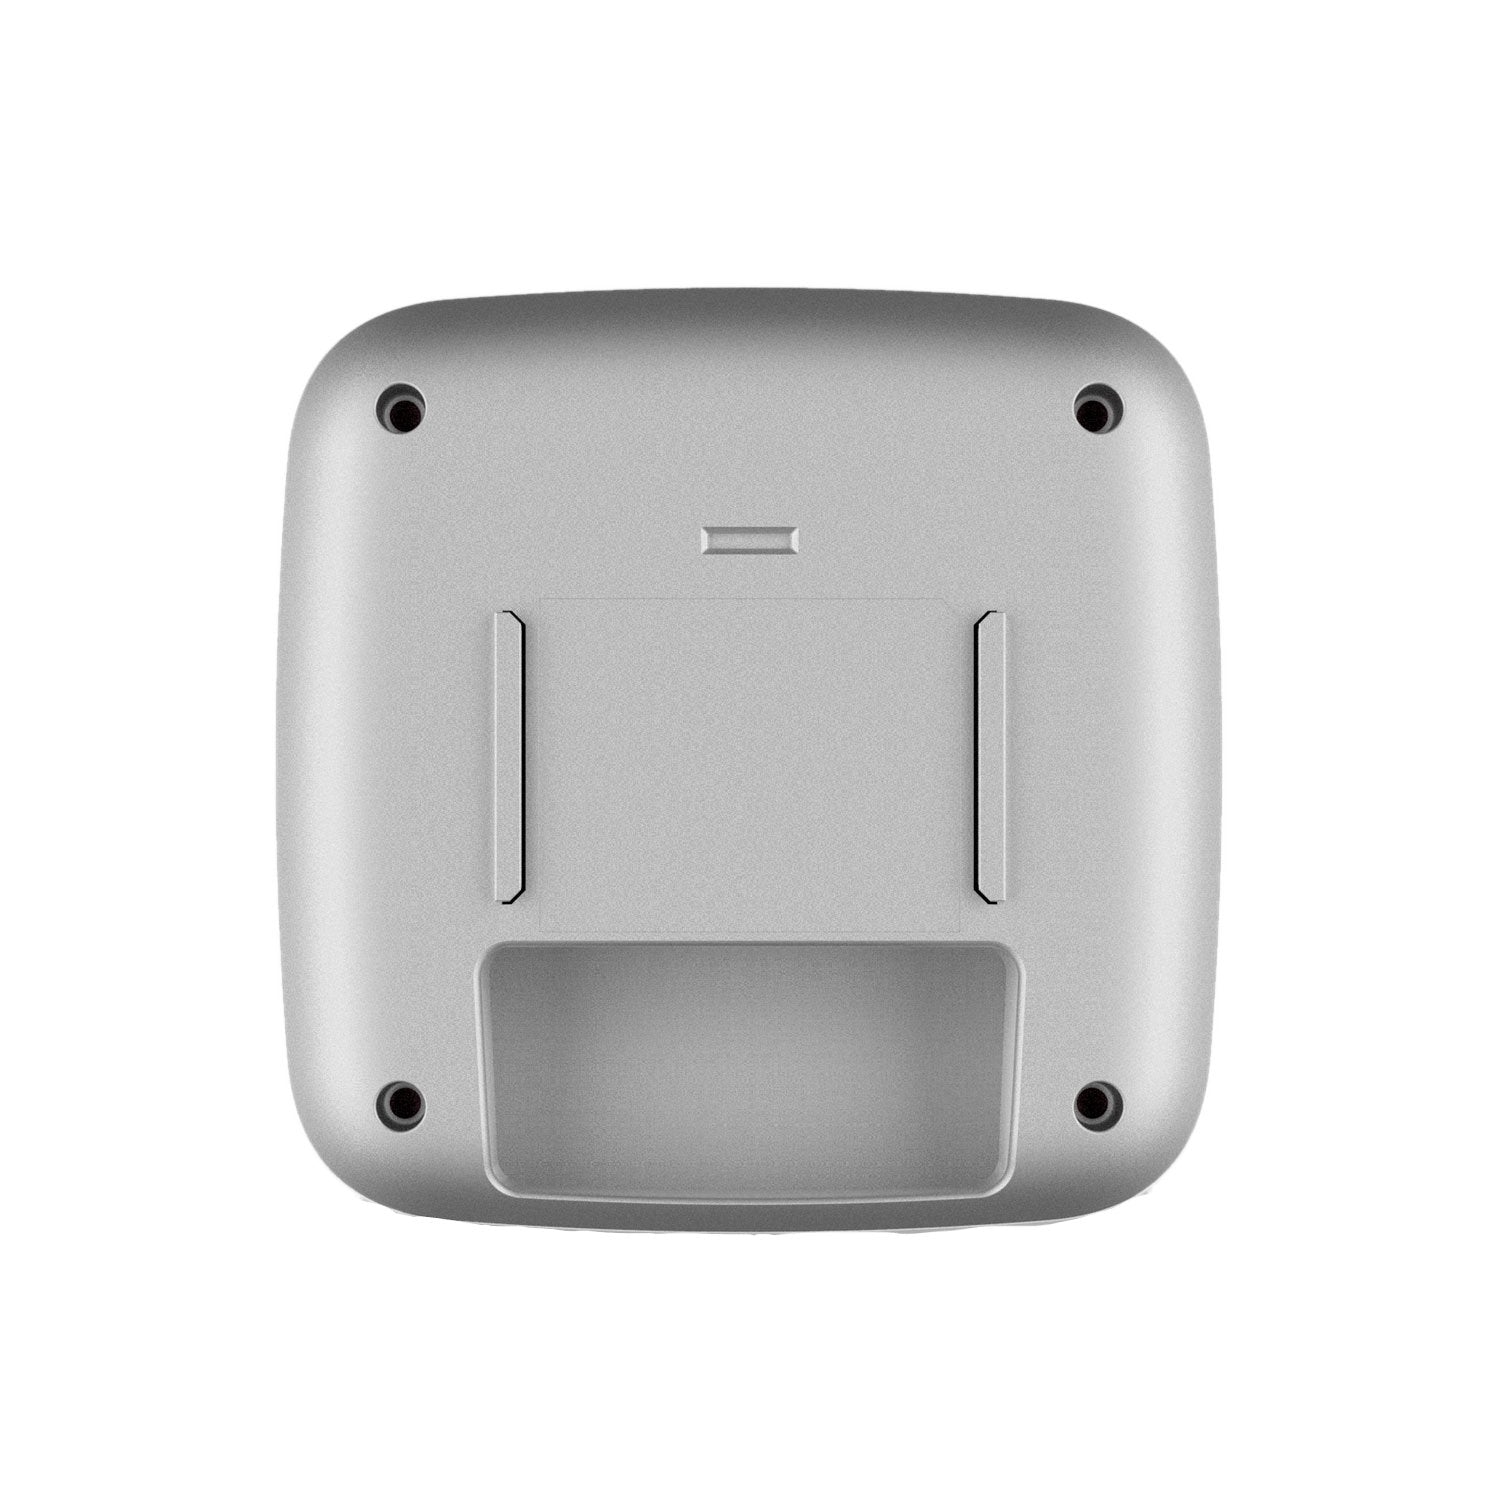 EnGenius EWS356-FIT 2×2 Indoor Wireless Wi-Fi 6 Access Point - Blue Wireless Store